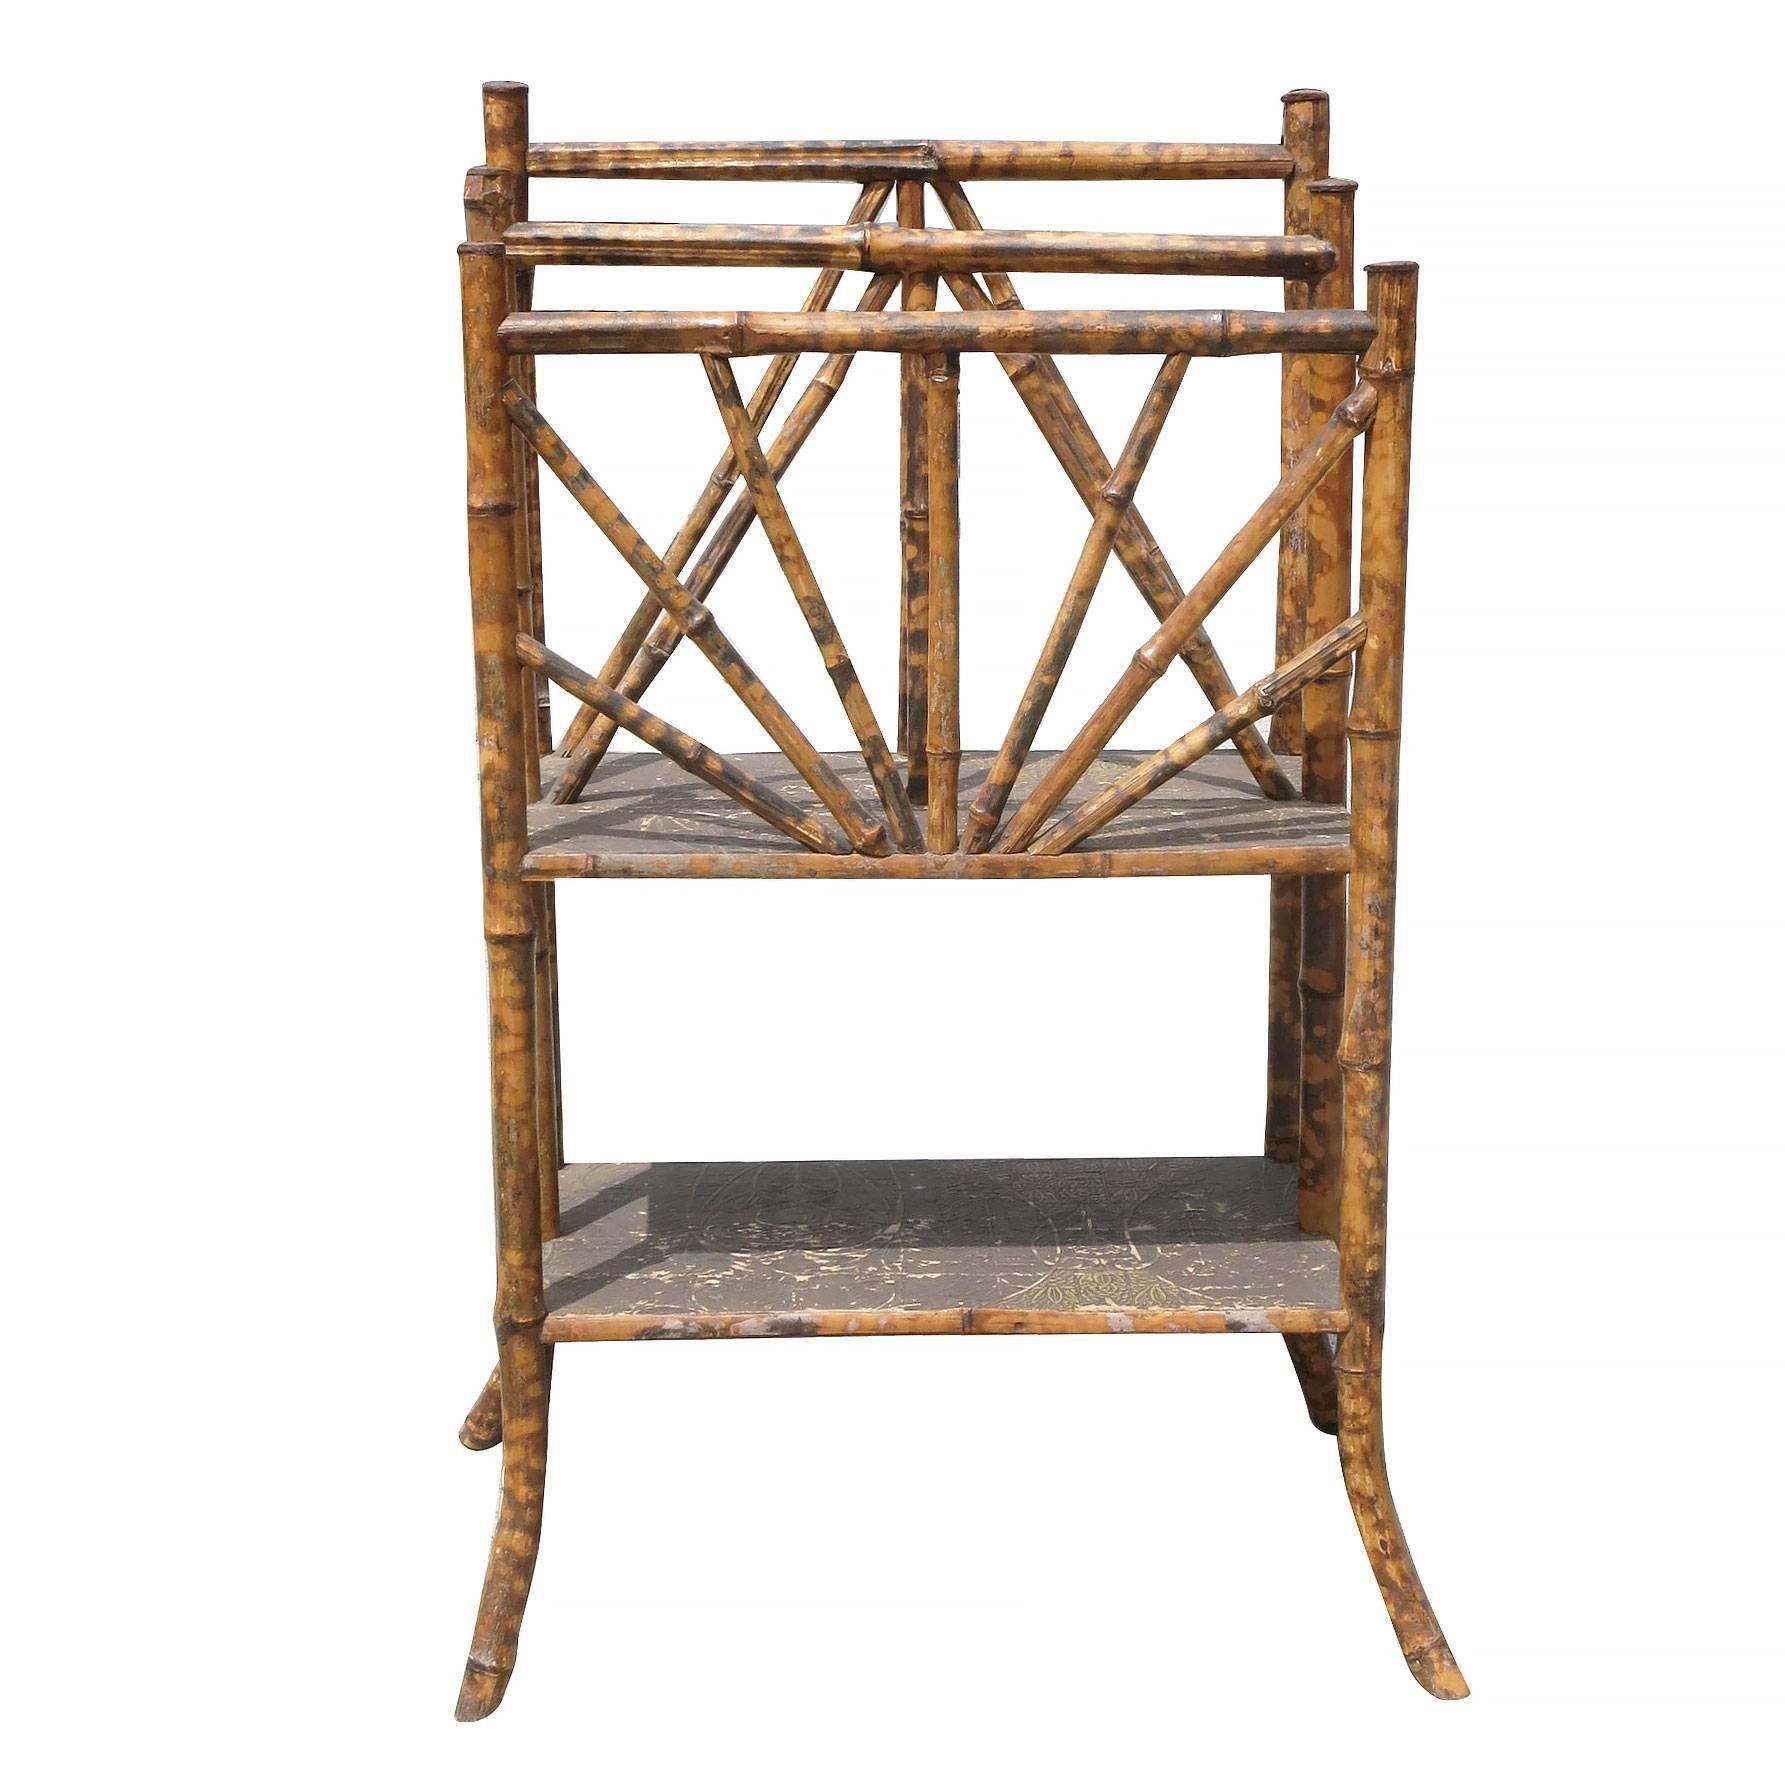 Antique tiger bamboo magazine rack with divider and bottom shelf.


Restored to new for you.

All rattan, bamboo and wicker furniture has been painstakingly refurbished to the highest standards with the best materials. All refinishing is done